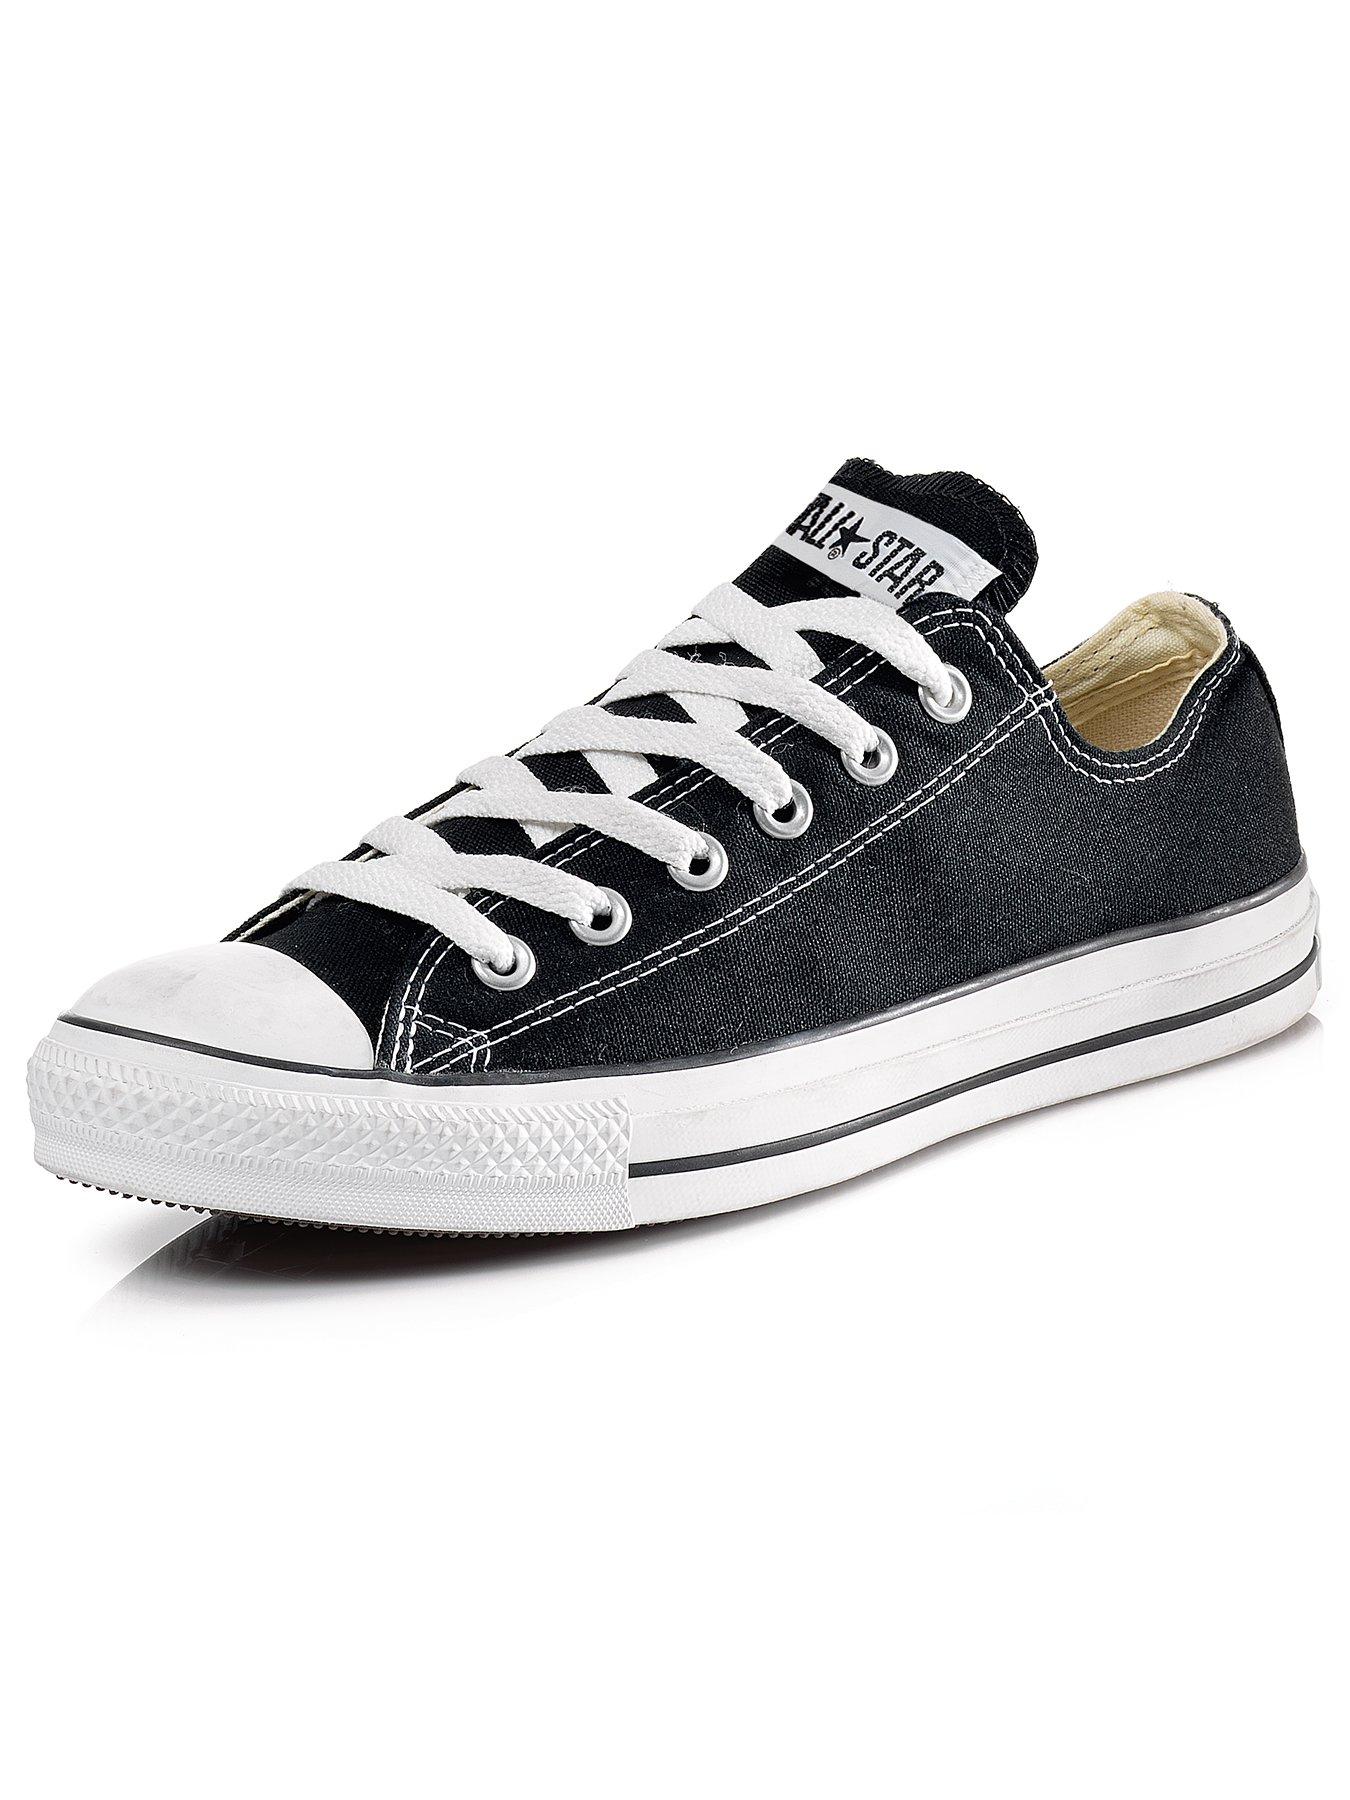 converse ct all star ox